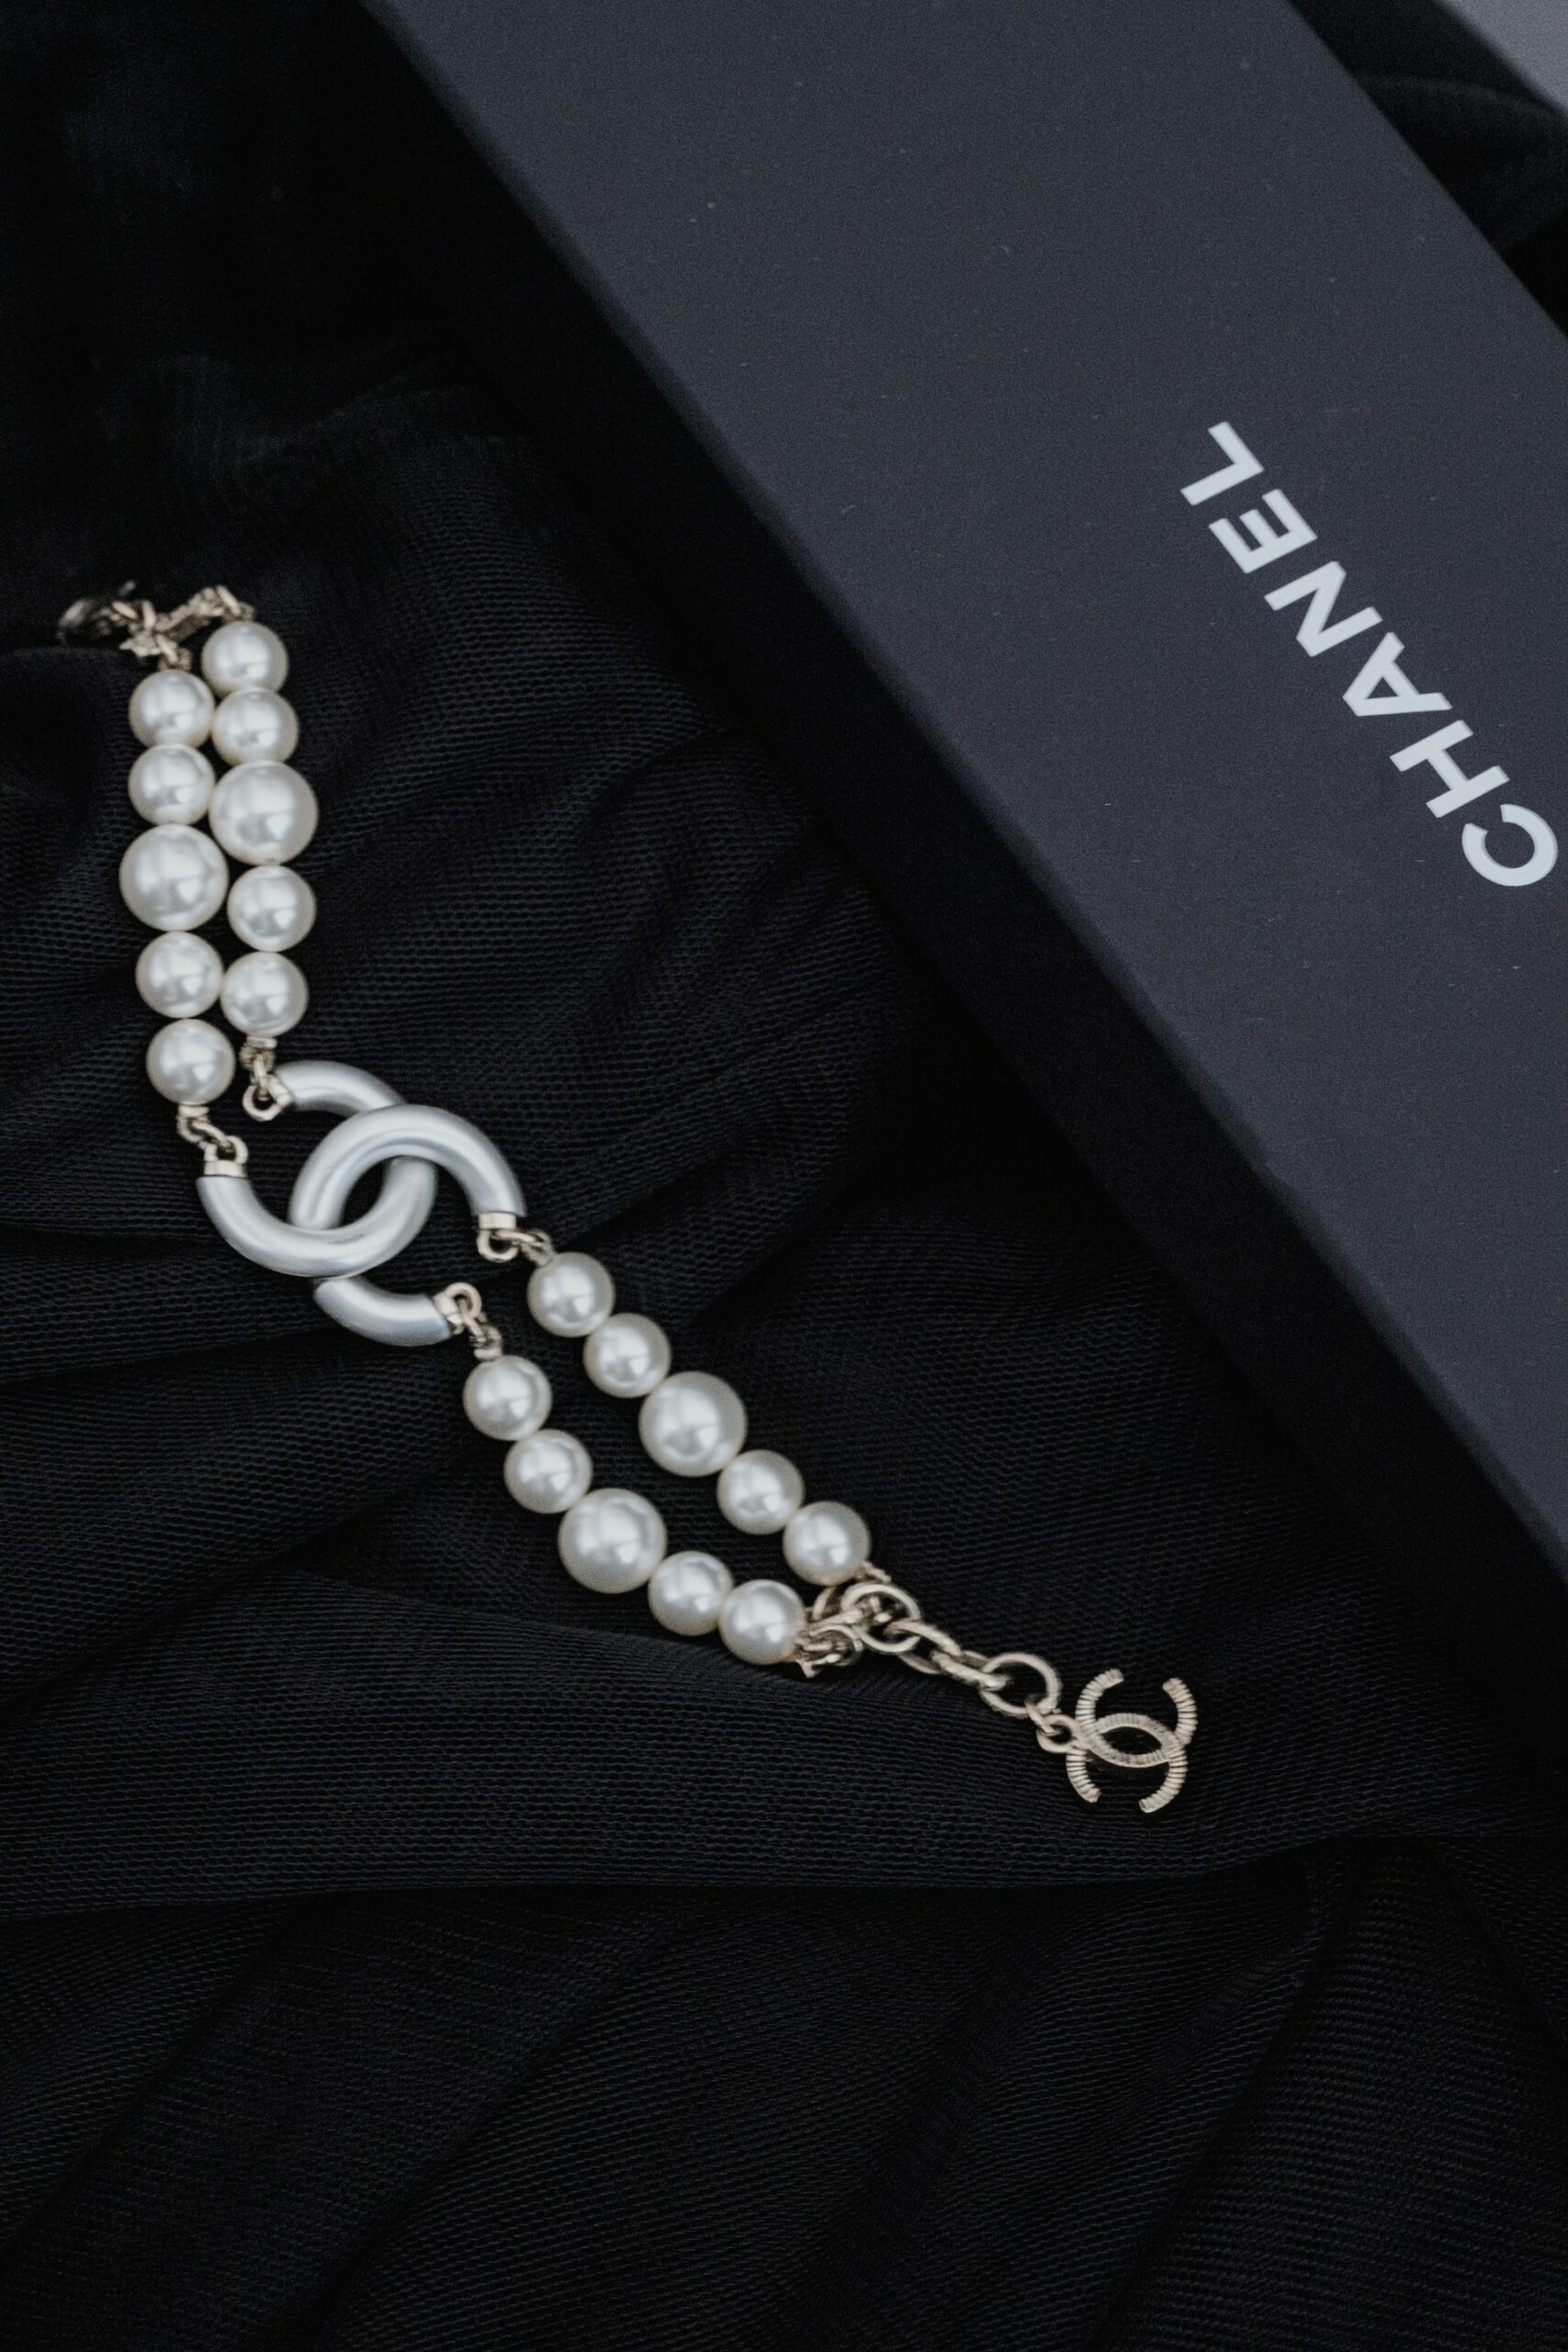 The Timeless Elegance: A Journey Through the History of Chanel